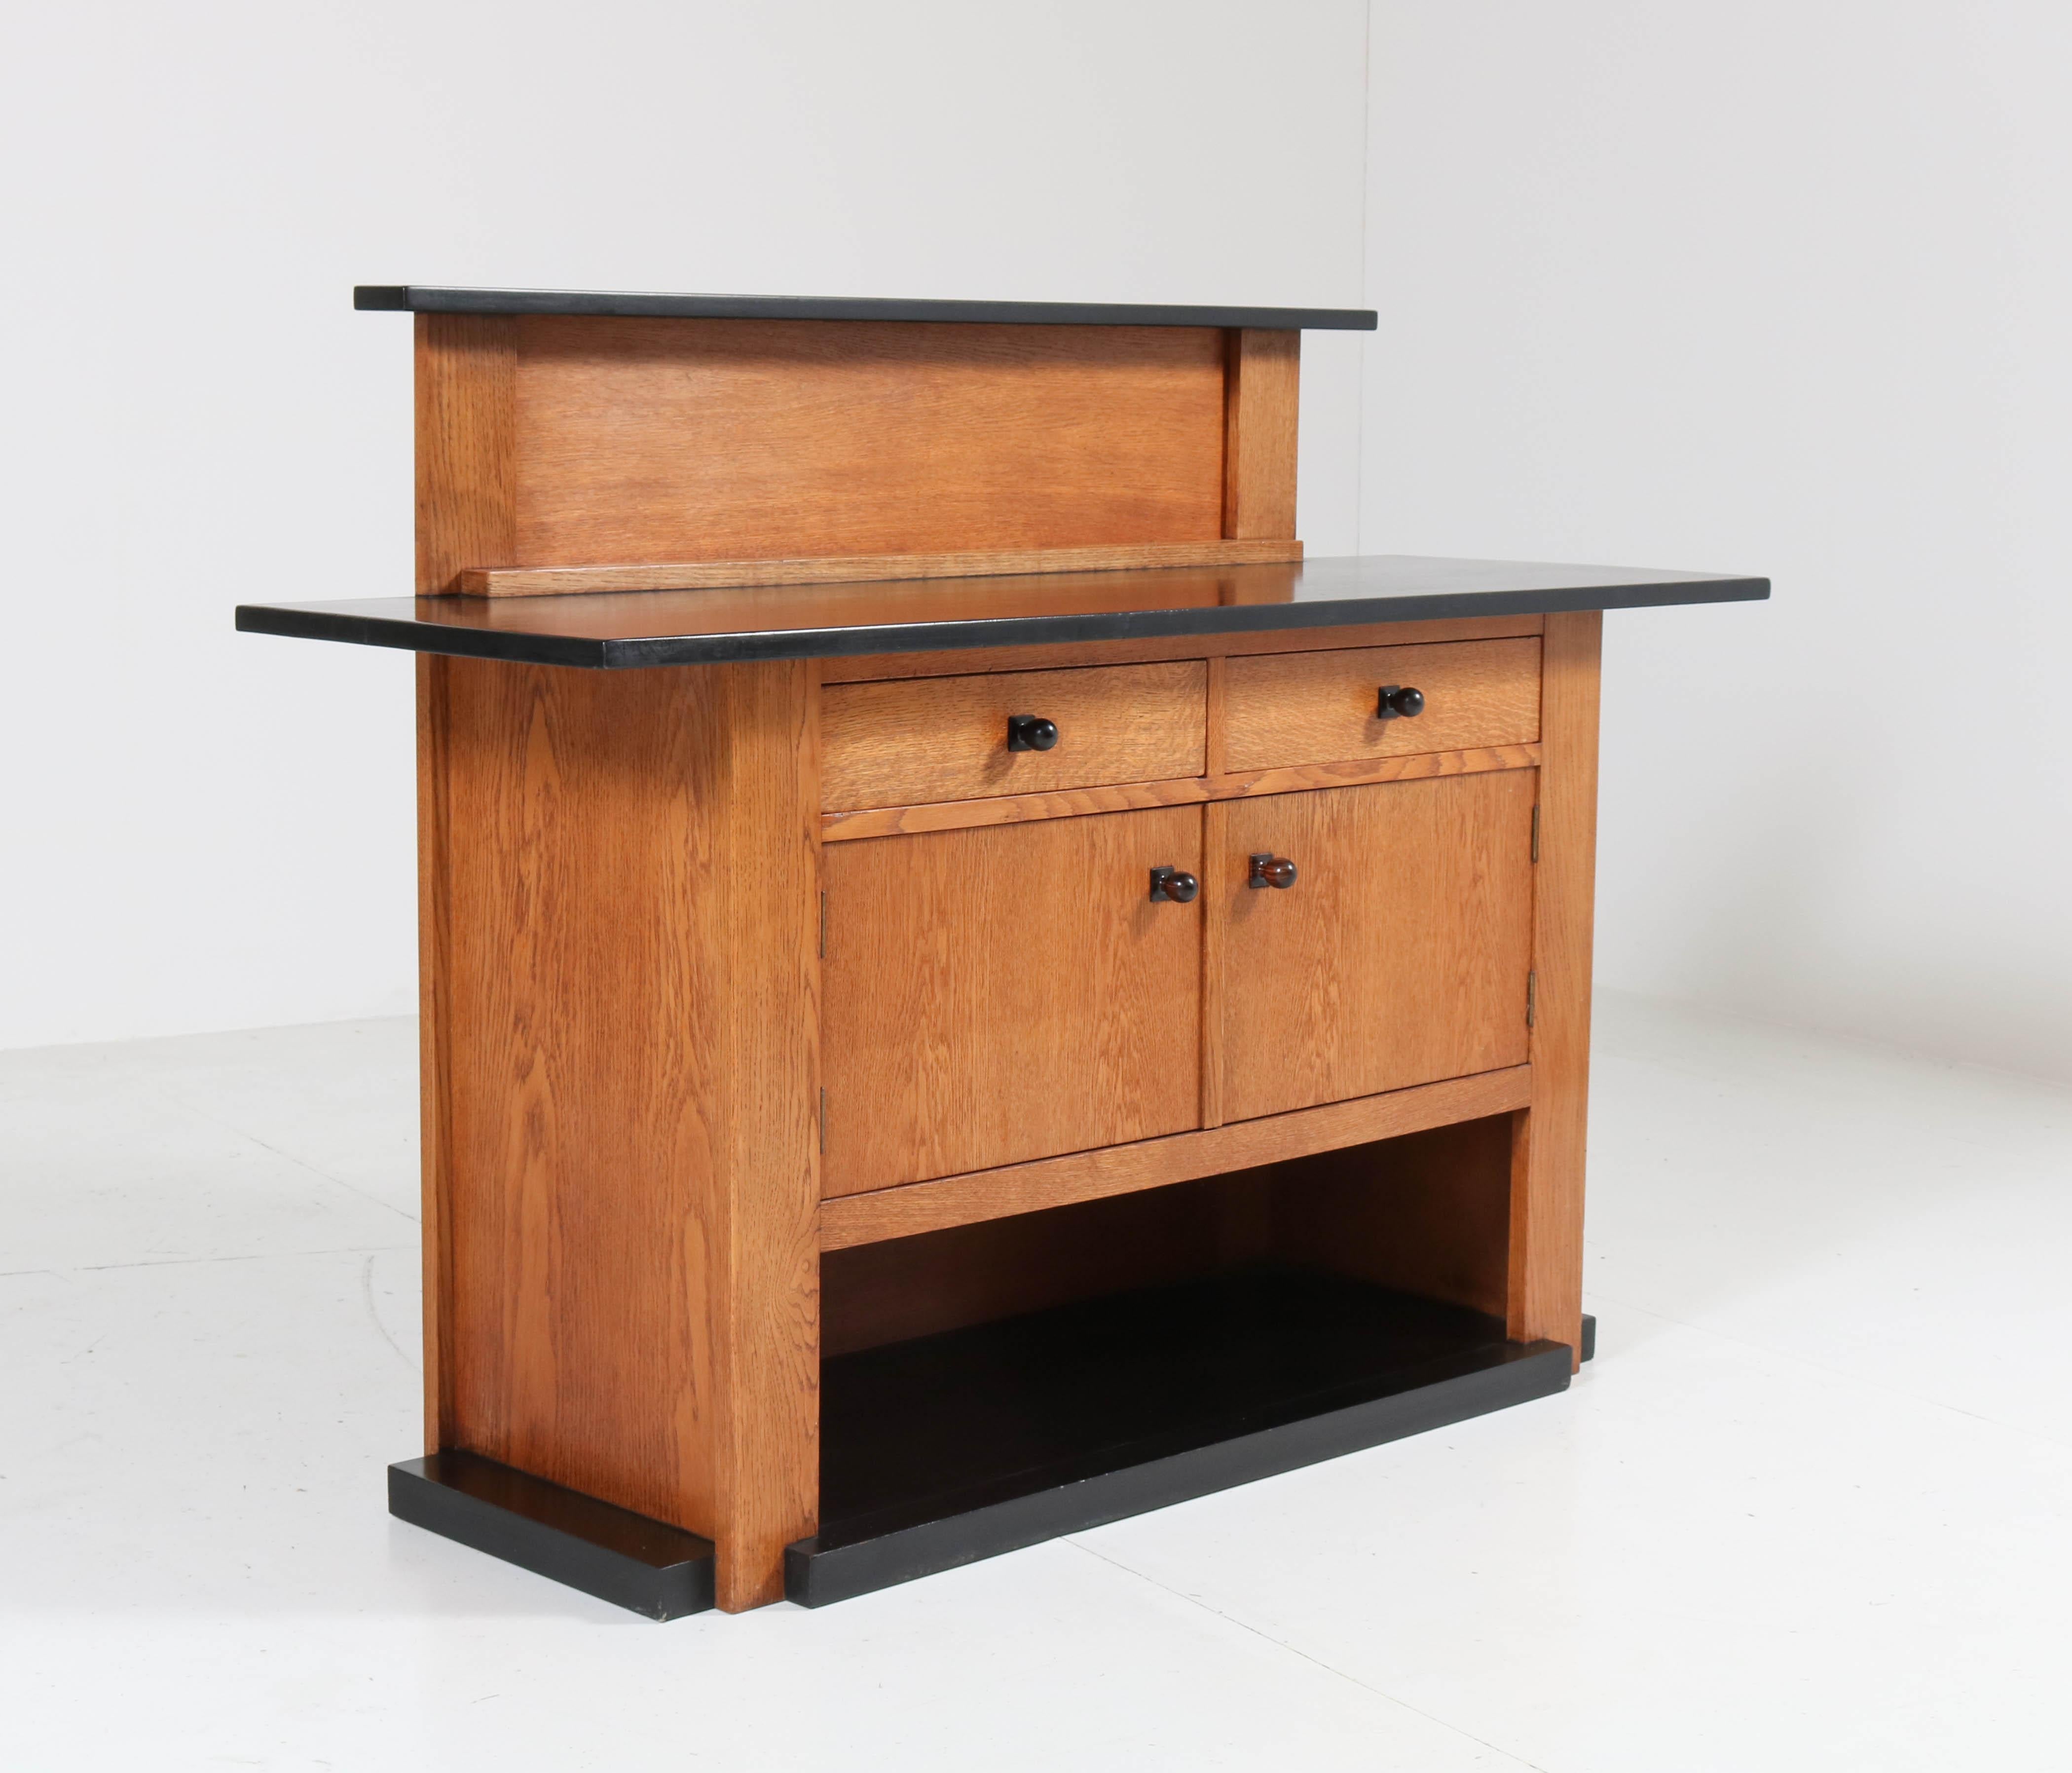 Lacquered Oak Art Deco Haagse School Sideboard or Credenza by J.C. Jansen for L.O.V.